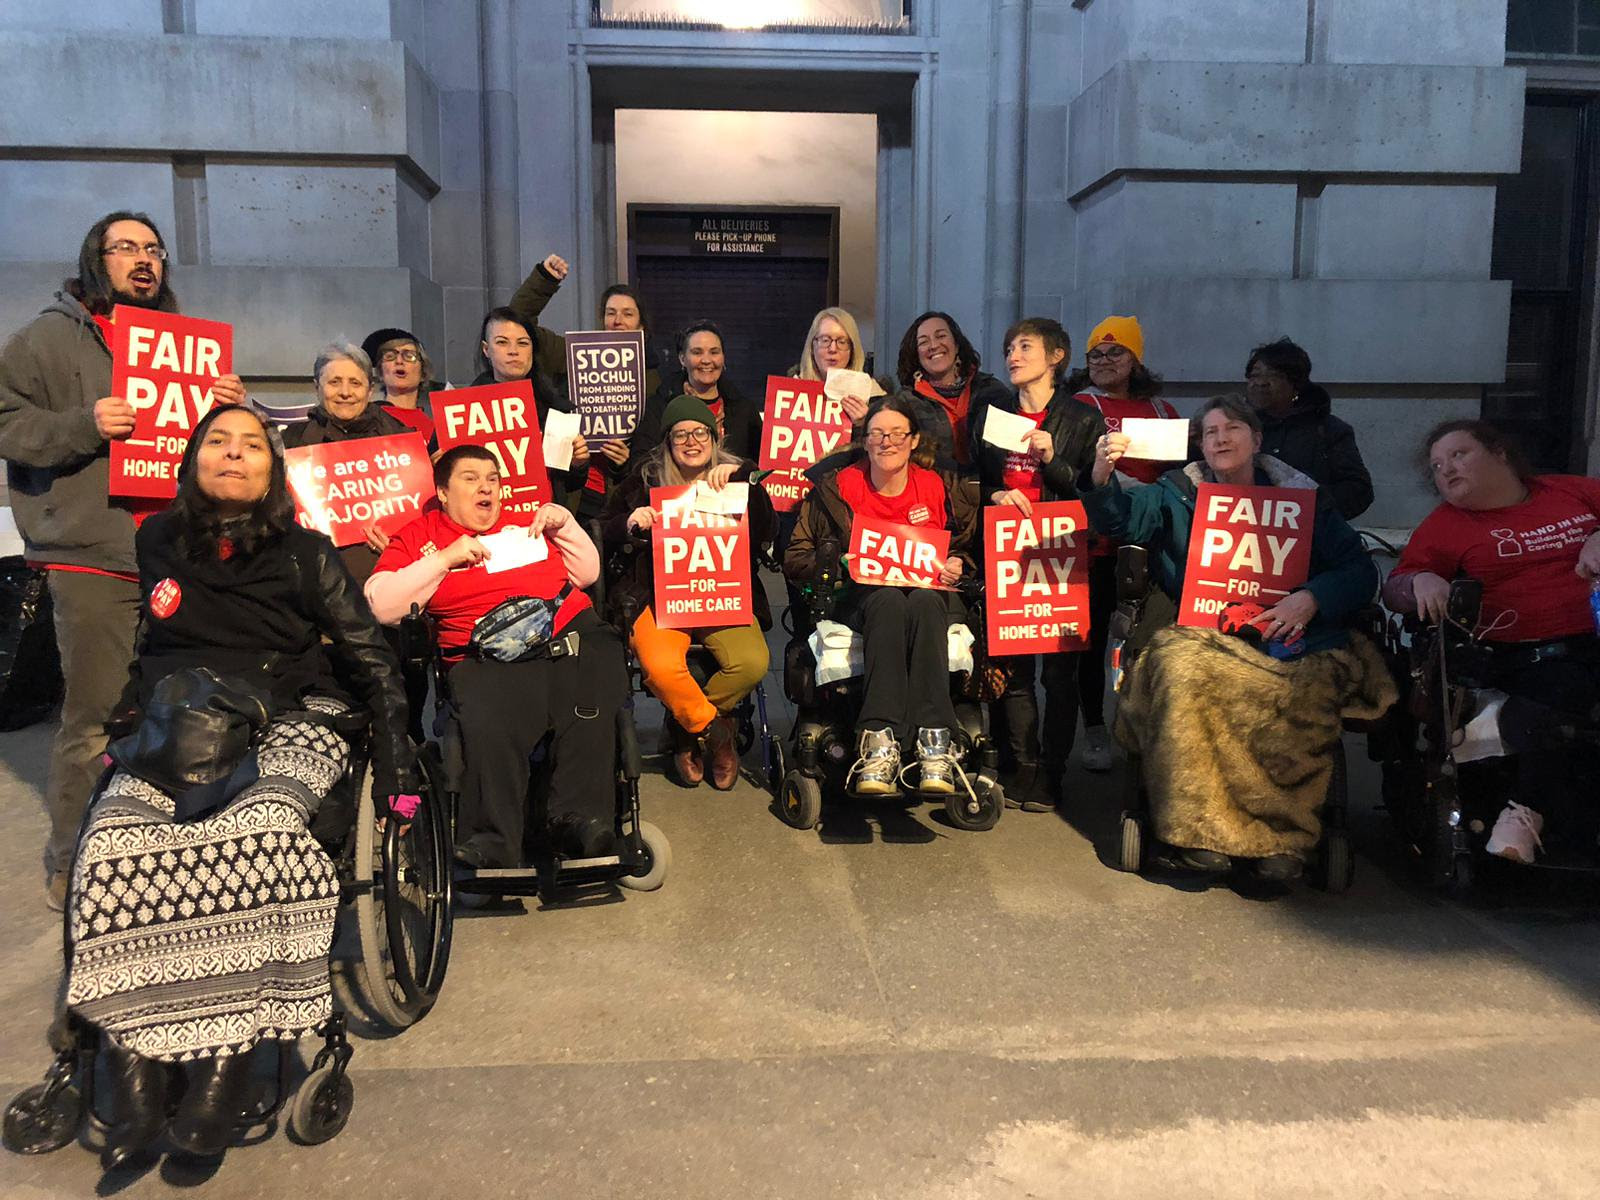 Photo of a group of people. half in wheelchairs, holding fair pay for home care signs